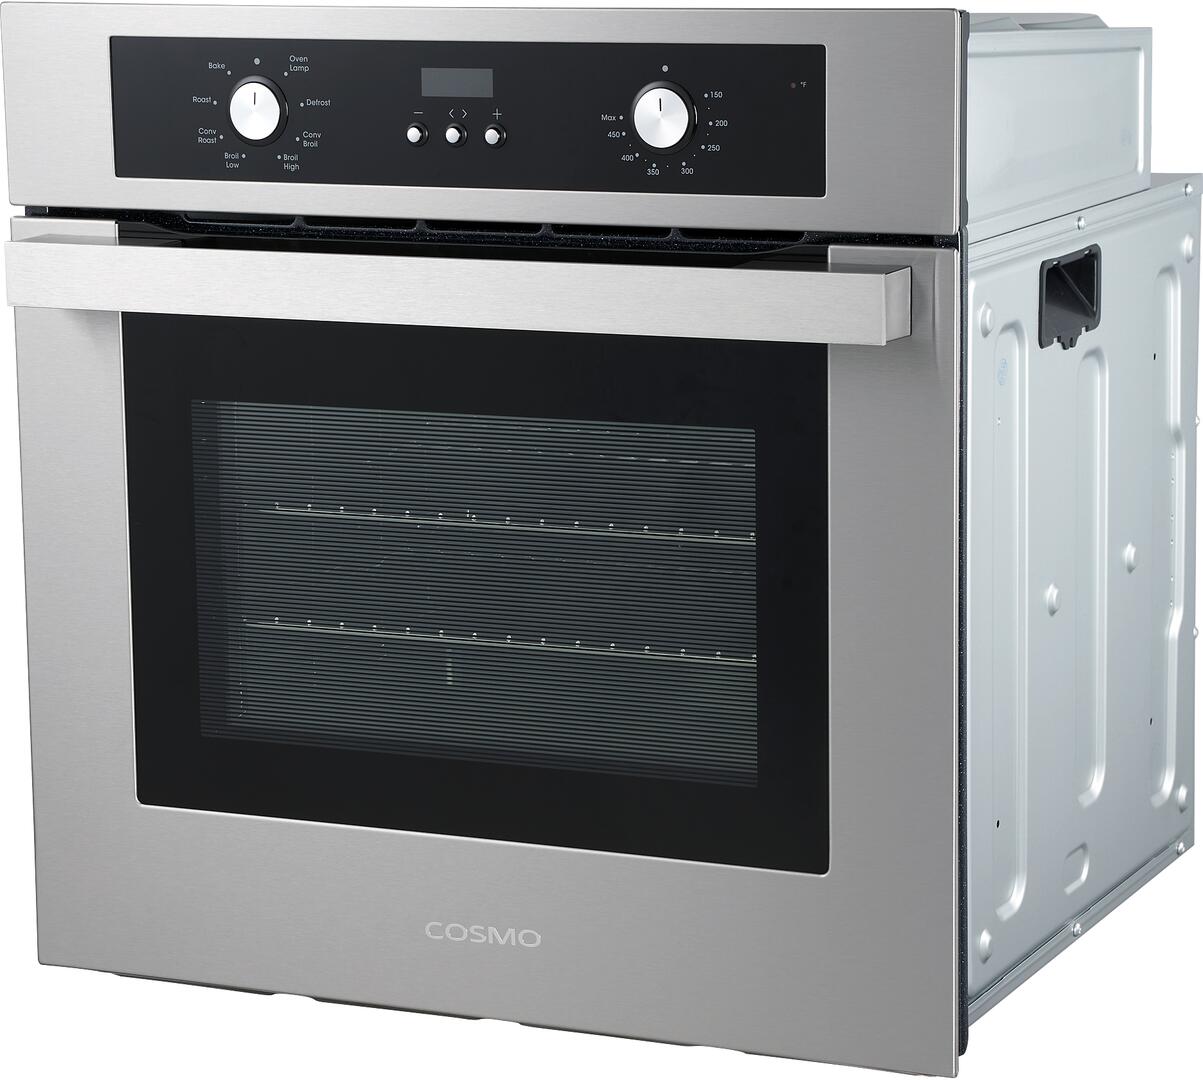 Galanz GL1BO24FSAN Electric Convection Wall Oven, 24, Stainless Steel